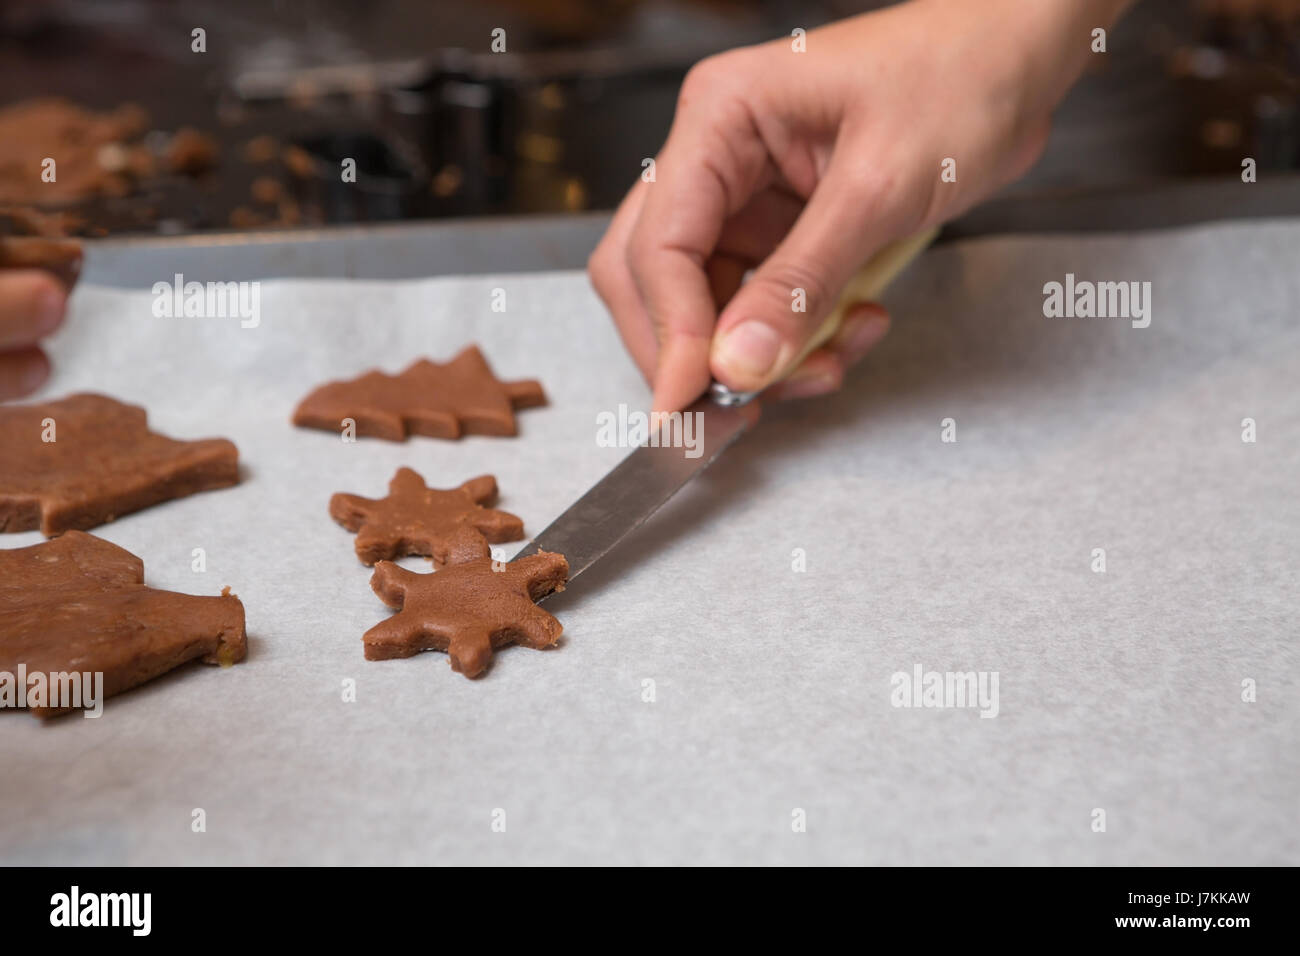 Different Biscuit Shapes On Baking Sheet Ready For The Oven Stock Photo